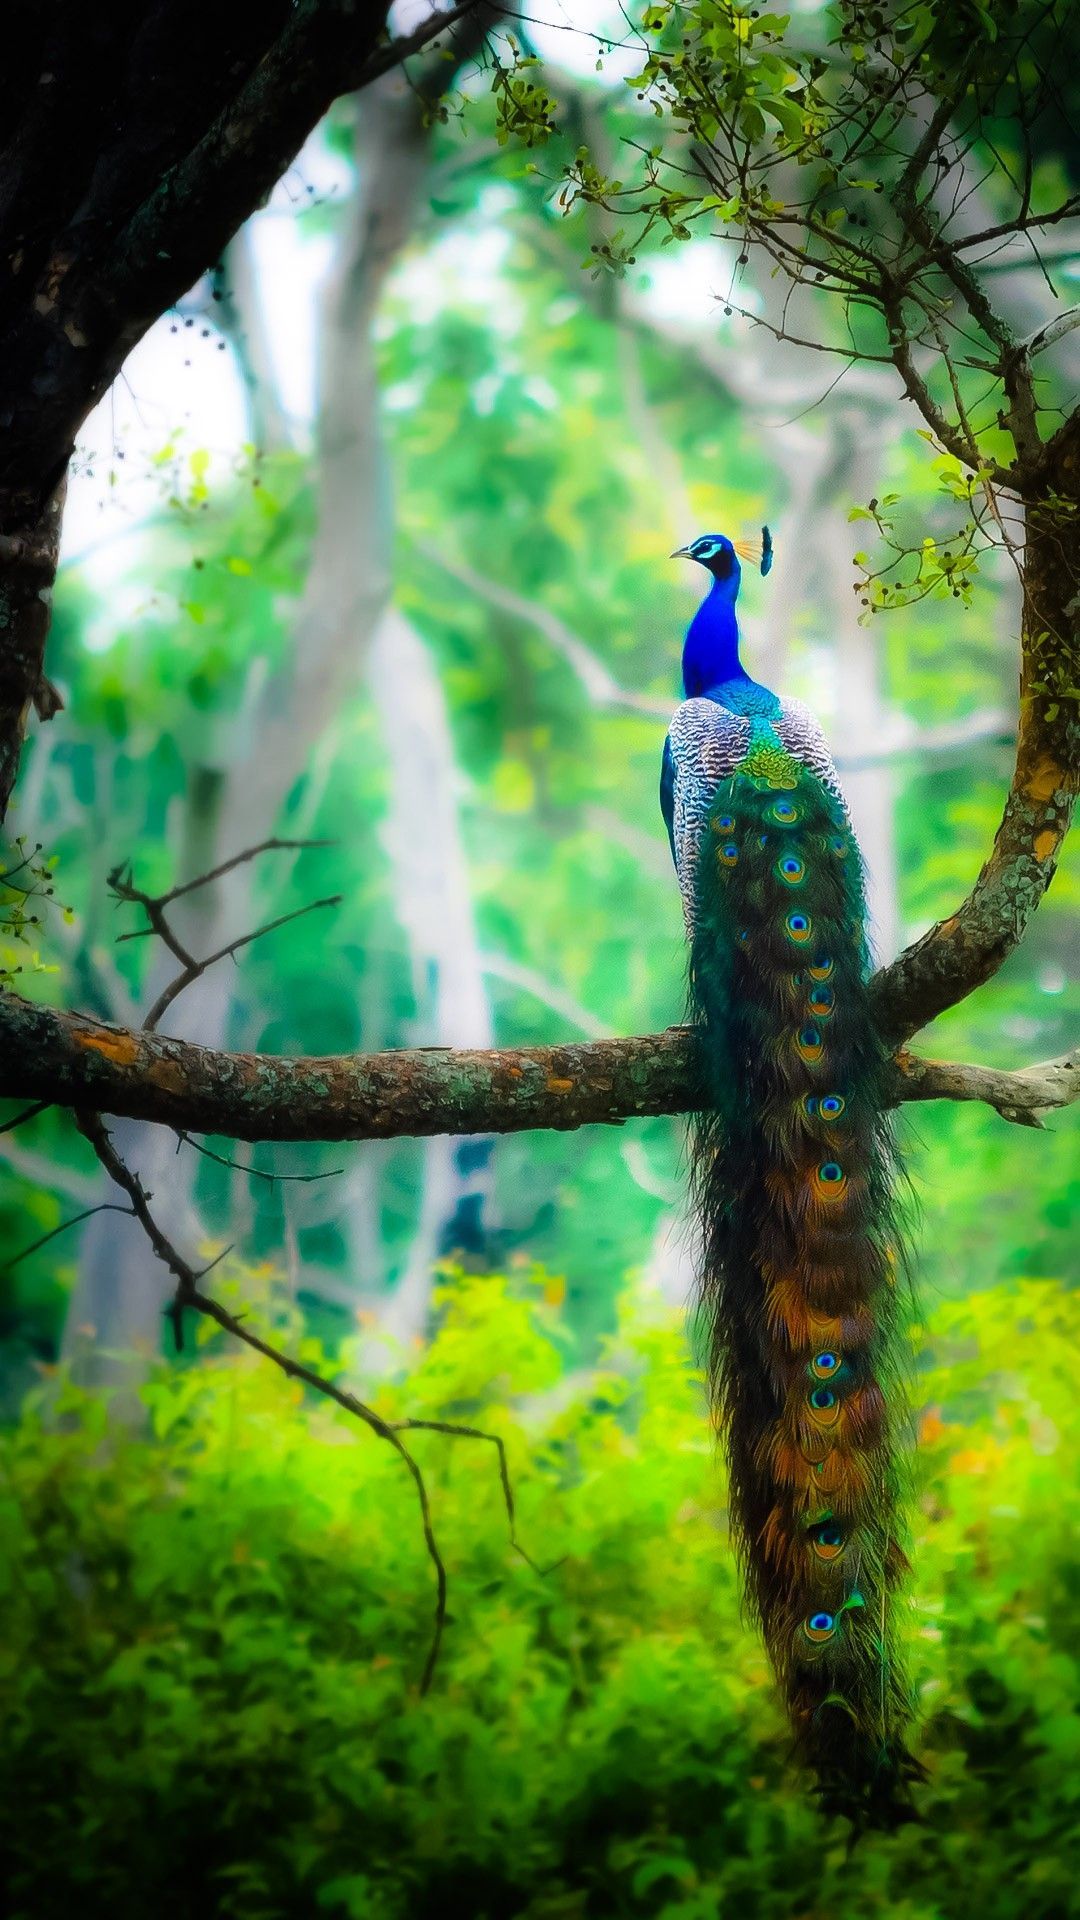 Peacock on a tree branch wallpaper 1080x1920 for iPhone 6 - Peacock